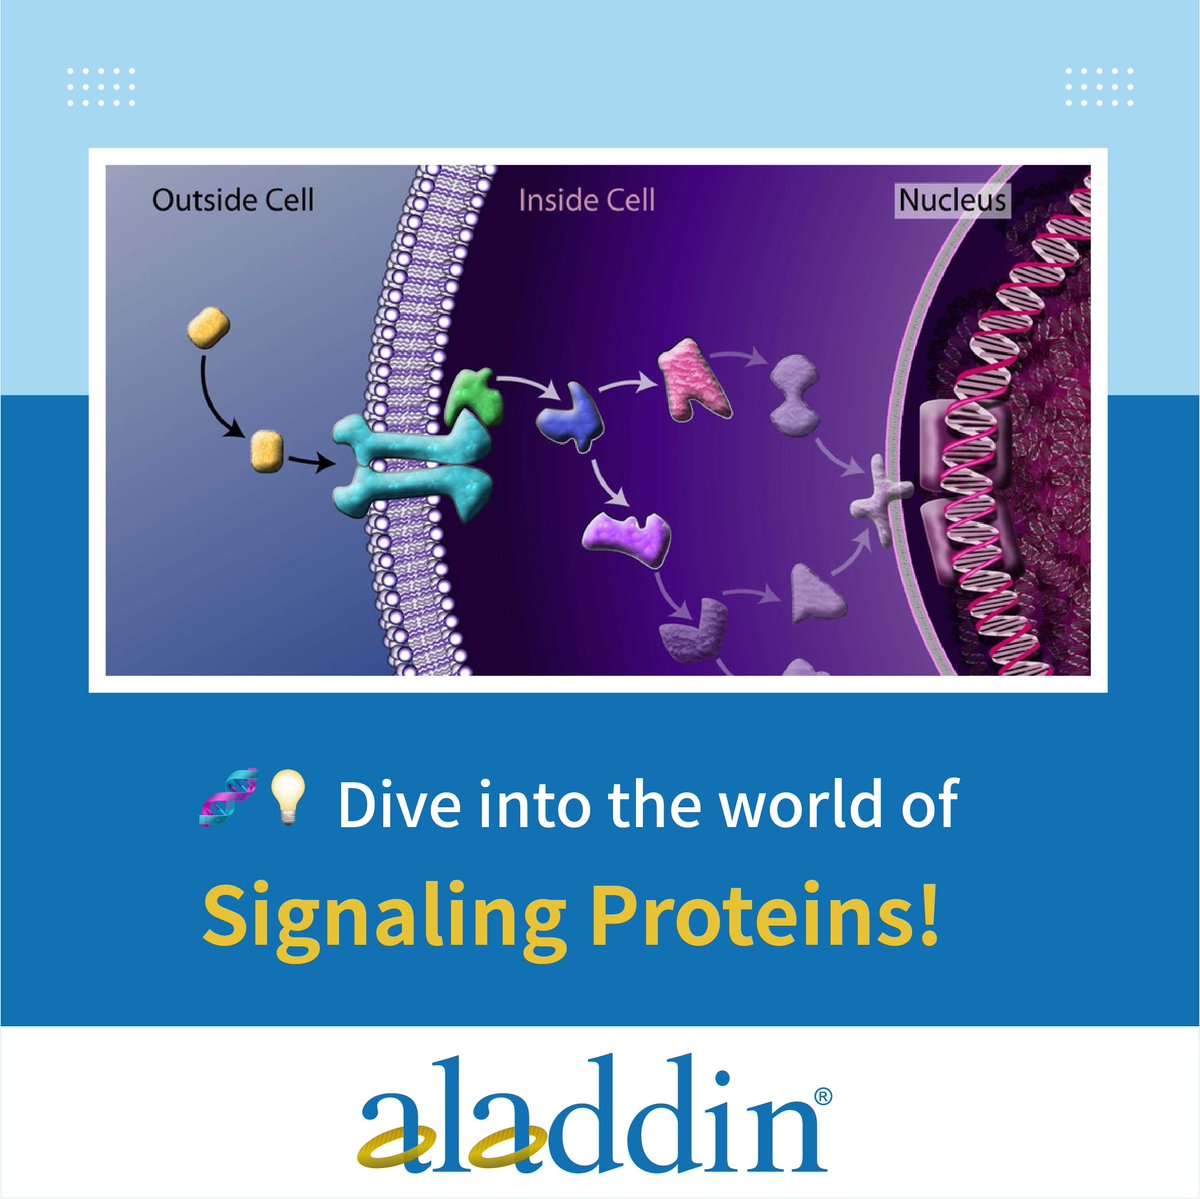 🌟 Dive into the world of Signaling Proteins! 🧬💡
These molecular messengers regulate vital cellular activities, from growth to immune response. 
#Science #CellBiology #SignalingProteins #AladdinScientific
aladdinsci.com